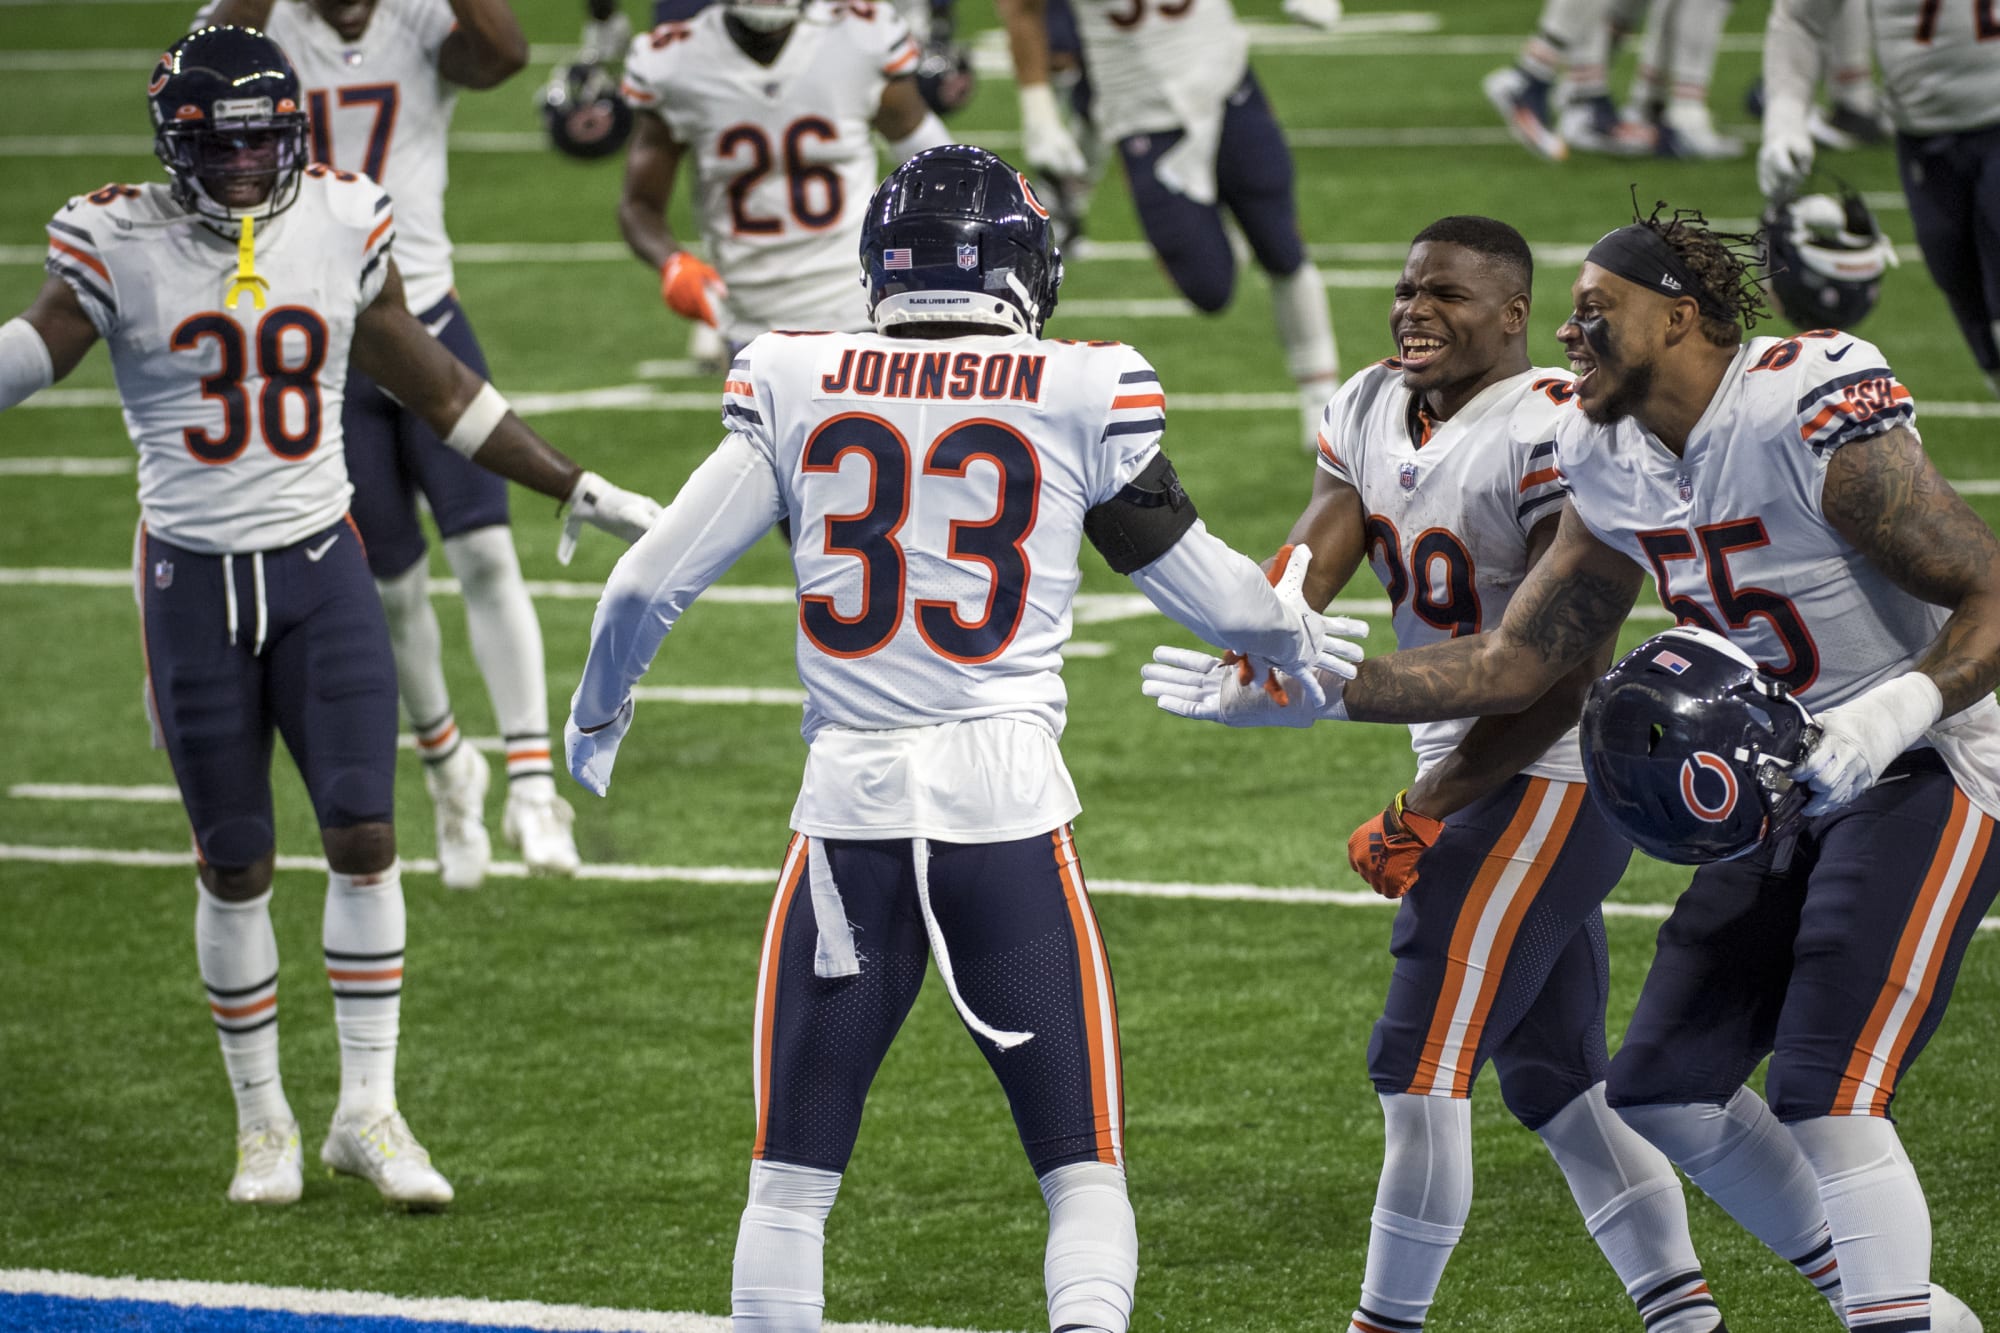 3 Chicago Bears players who could lose their starting jobs to rookies